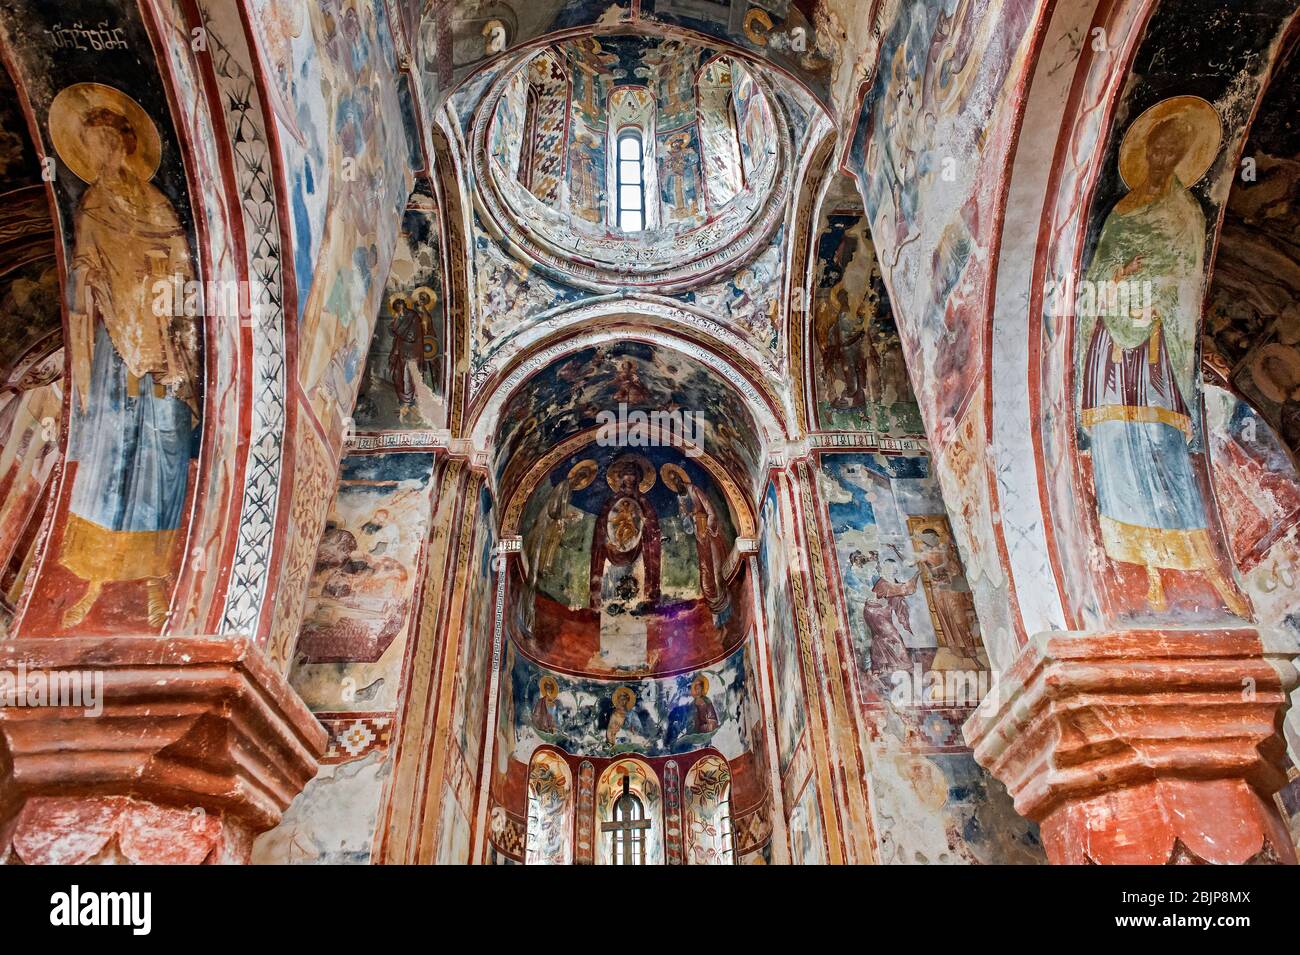 Interior of the Georgian Orthodox of St. George covered with frescoes dating from the 16th century,  Gelati Monastery complex, Kutaisi, Georgia Stock Photo